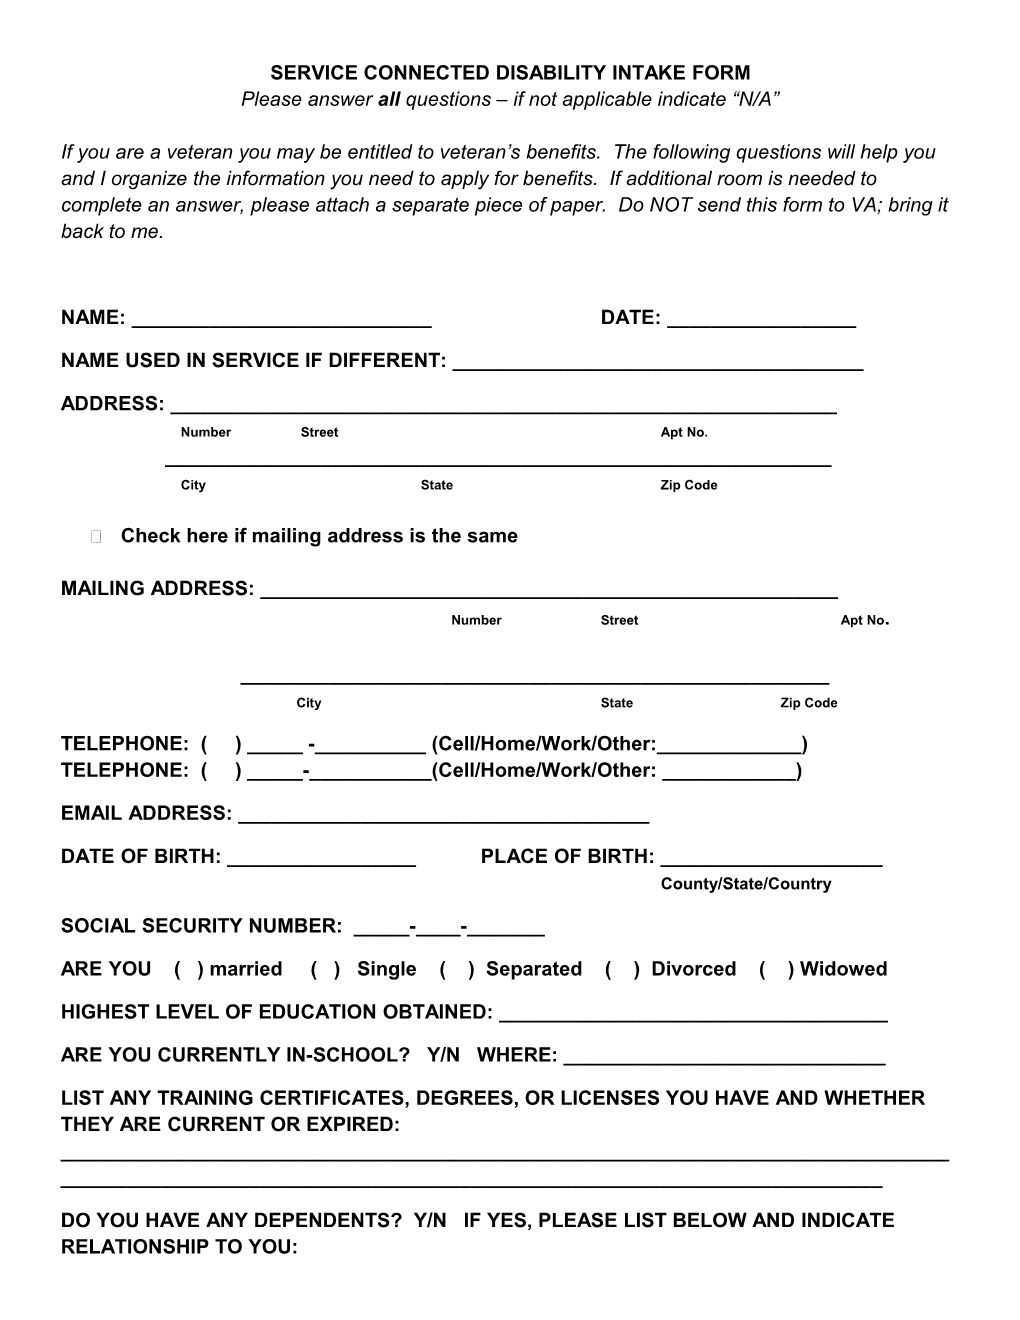 Service Connected Disability Intake Form